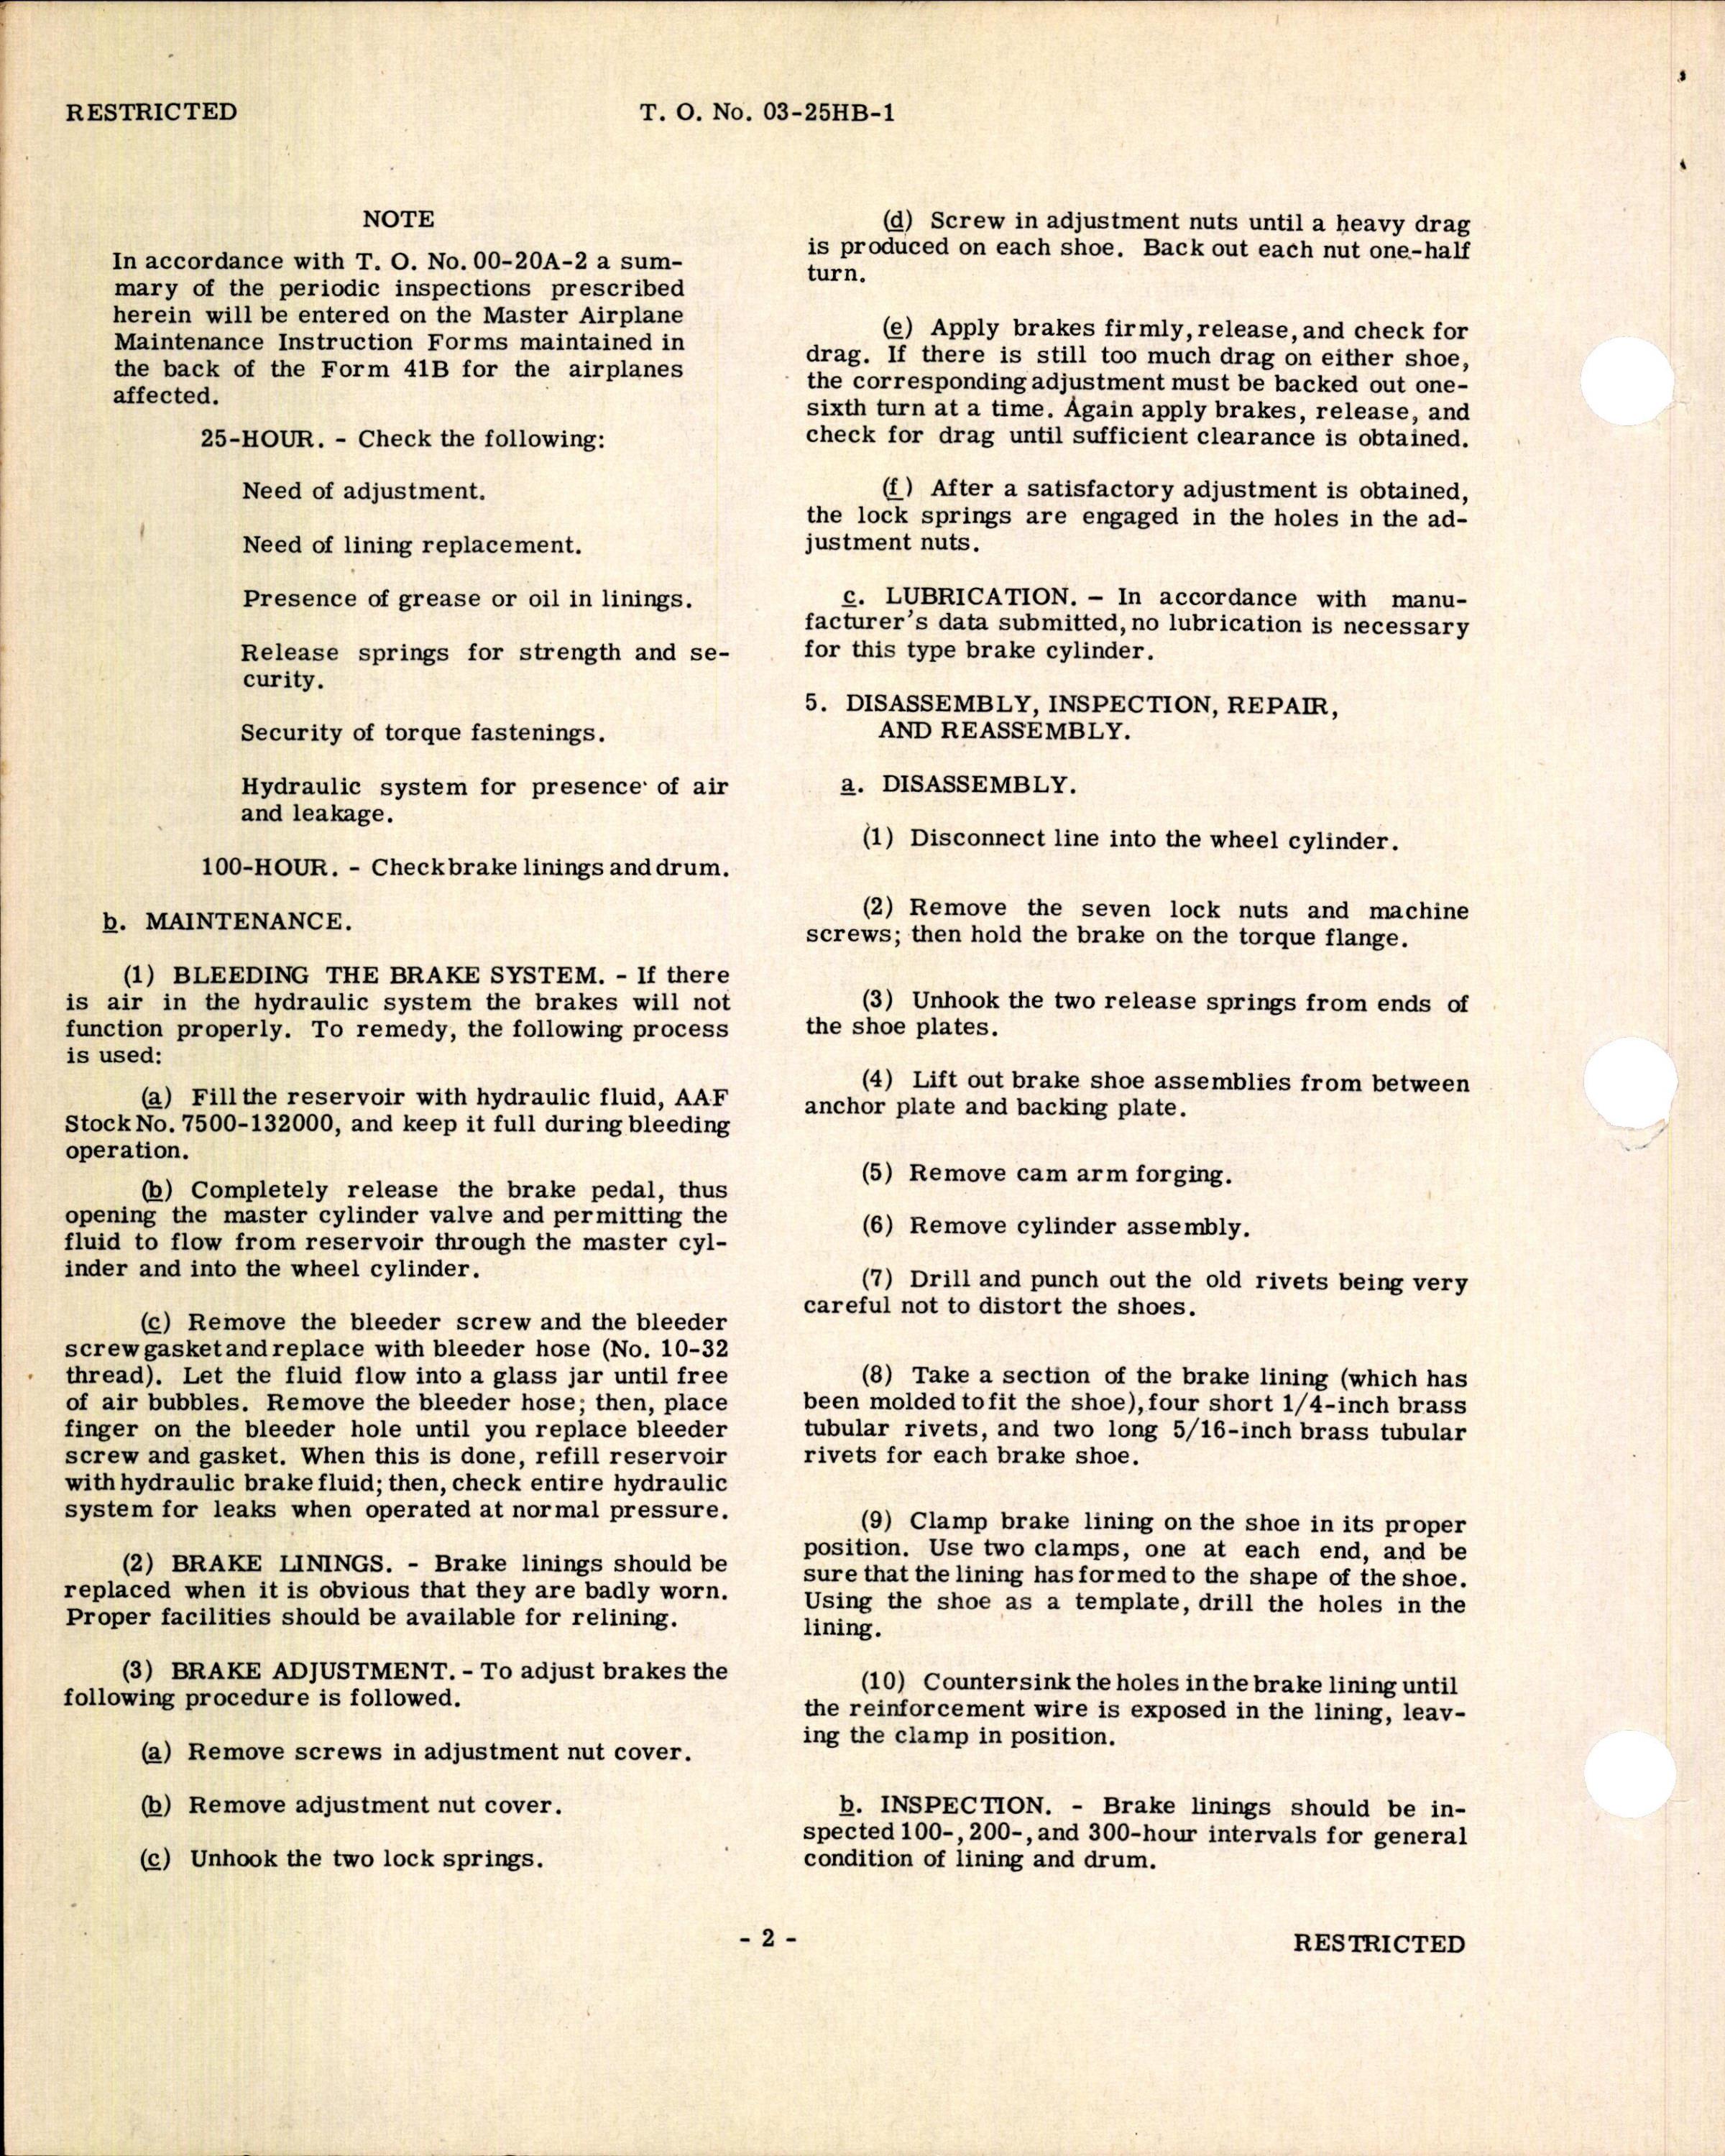 Sample page 6 from AirCorps Library document: Handbook of Instructions for Hydraulic Brake Assembly